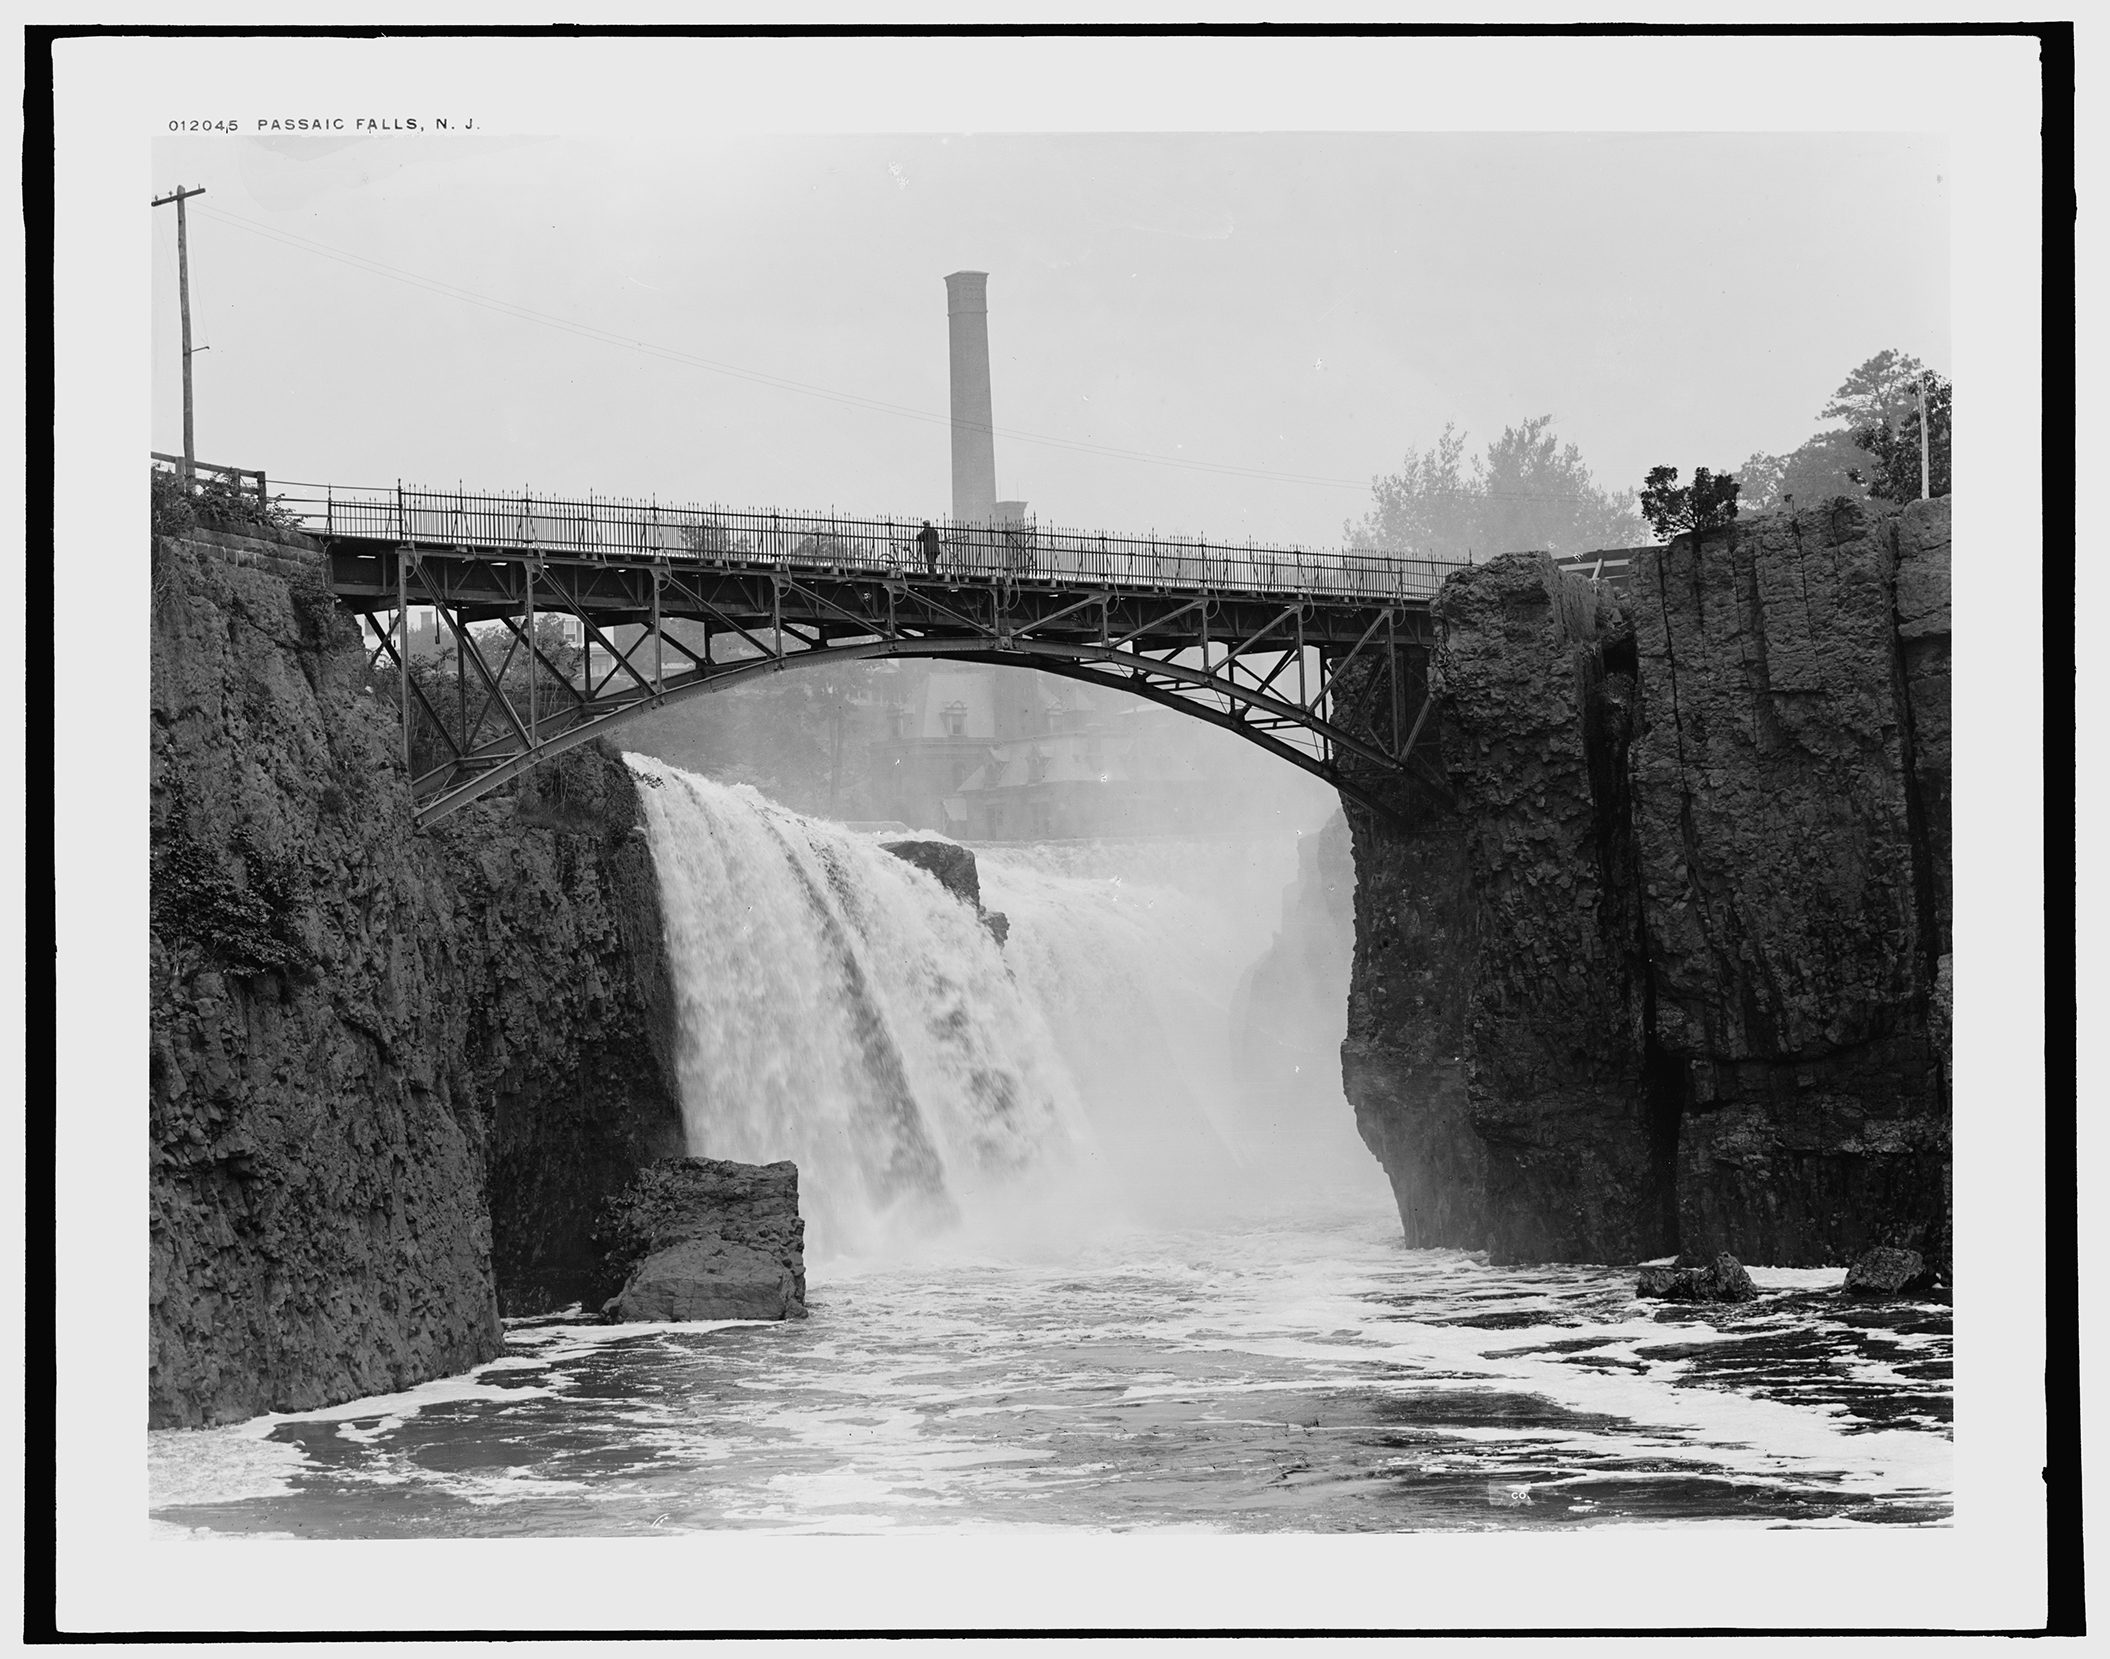 <p>Detroit Publishing Co., Copyright Claimant, and Publisher Detroit Publishing Co. Passaic Falls, N.J. New Jersey United States Passaic River Paterson, ca. 1900.</p>